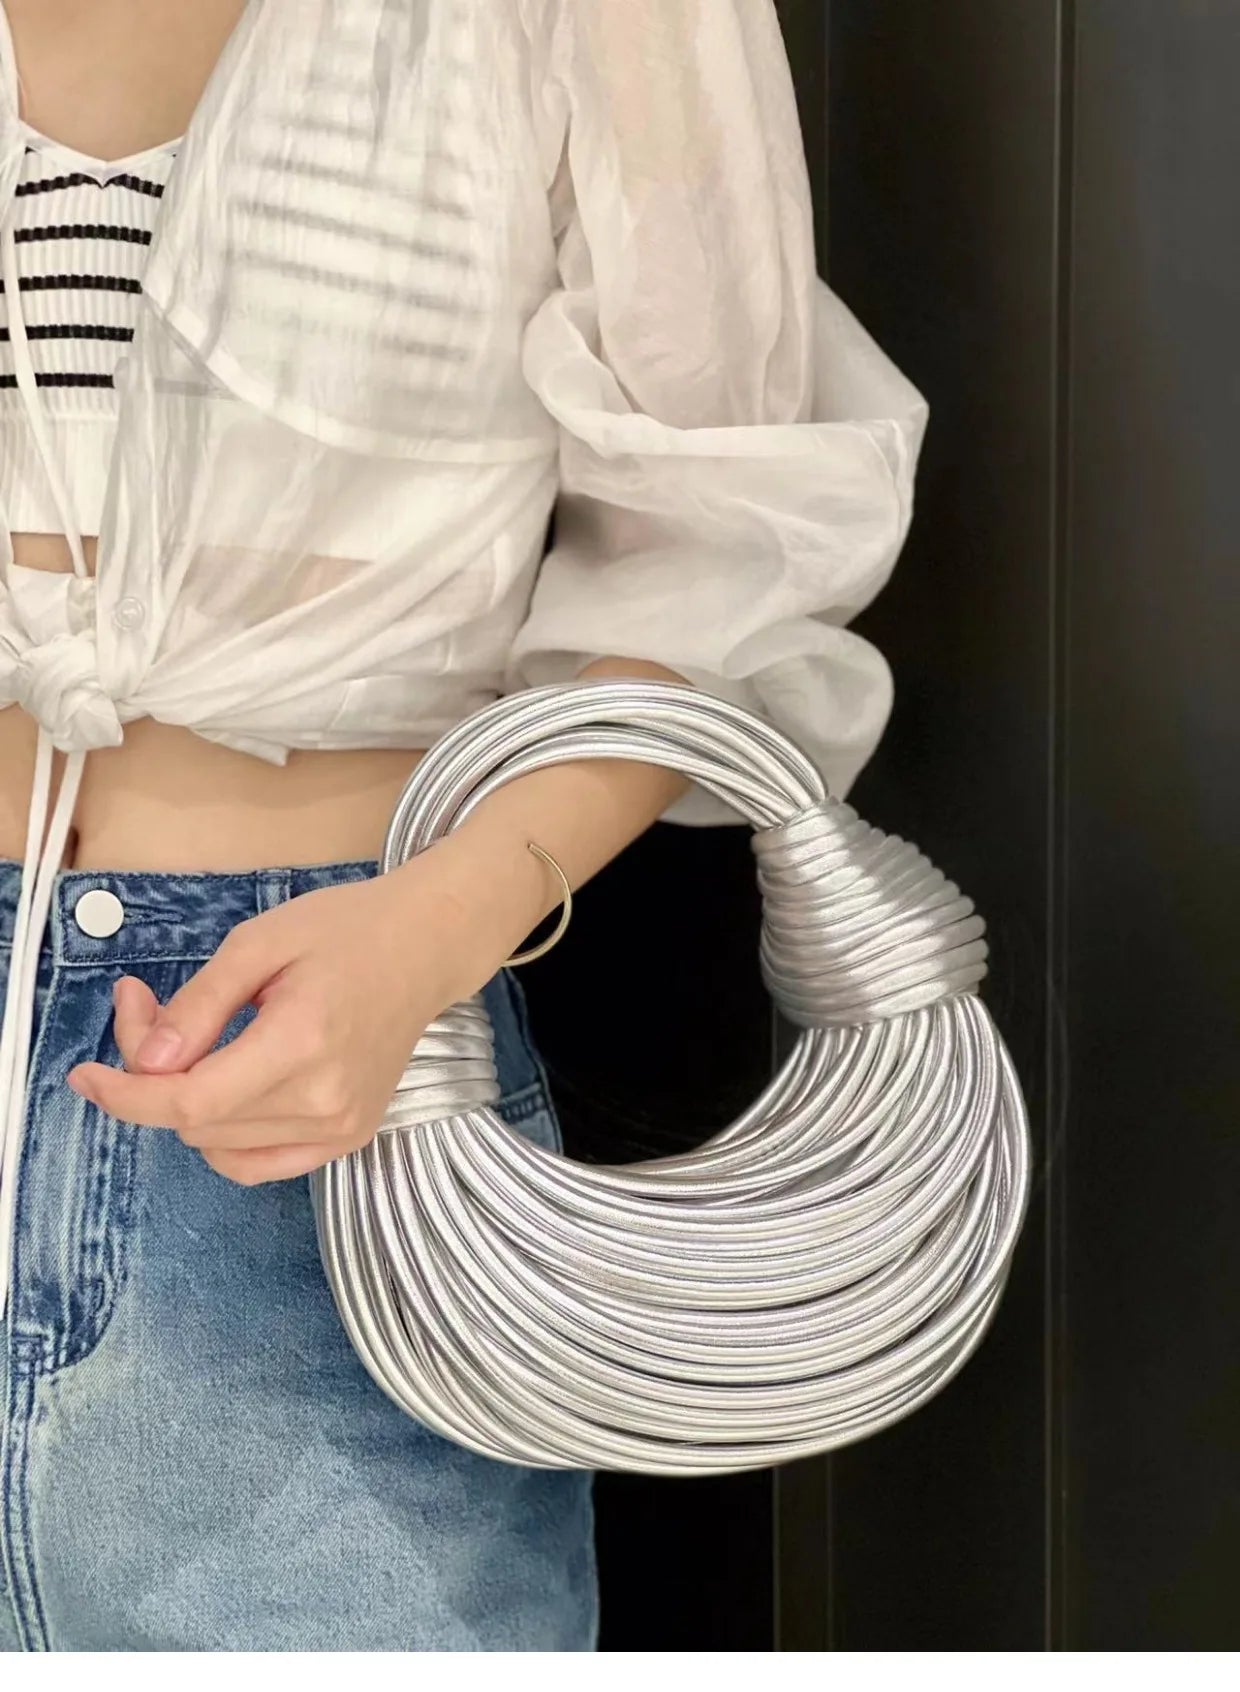 Handbags for Women New in Gold Luxury Designer Brand Handwoven Noodle Bags Rope Knotted Pulled Hobo Silver Evening Clutch